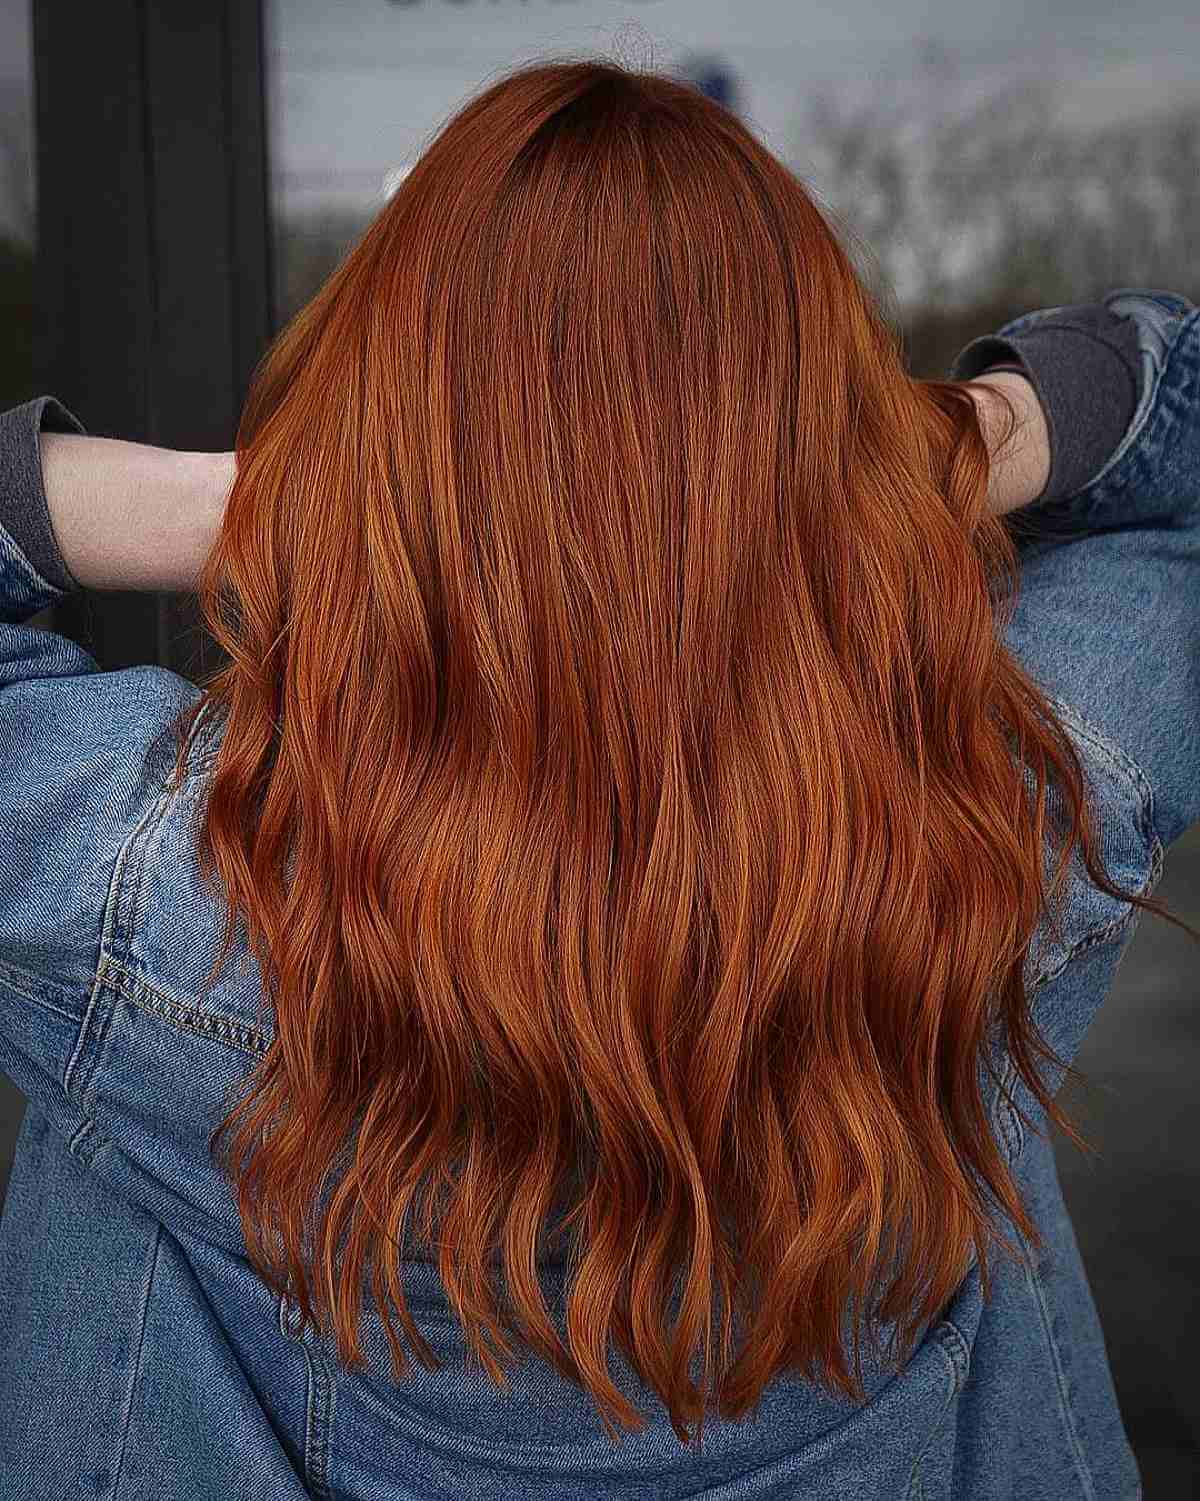 Rusty Apple Cider Hair Color for Fall